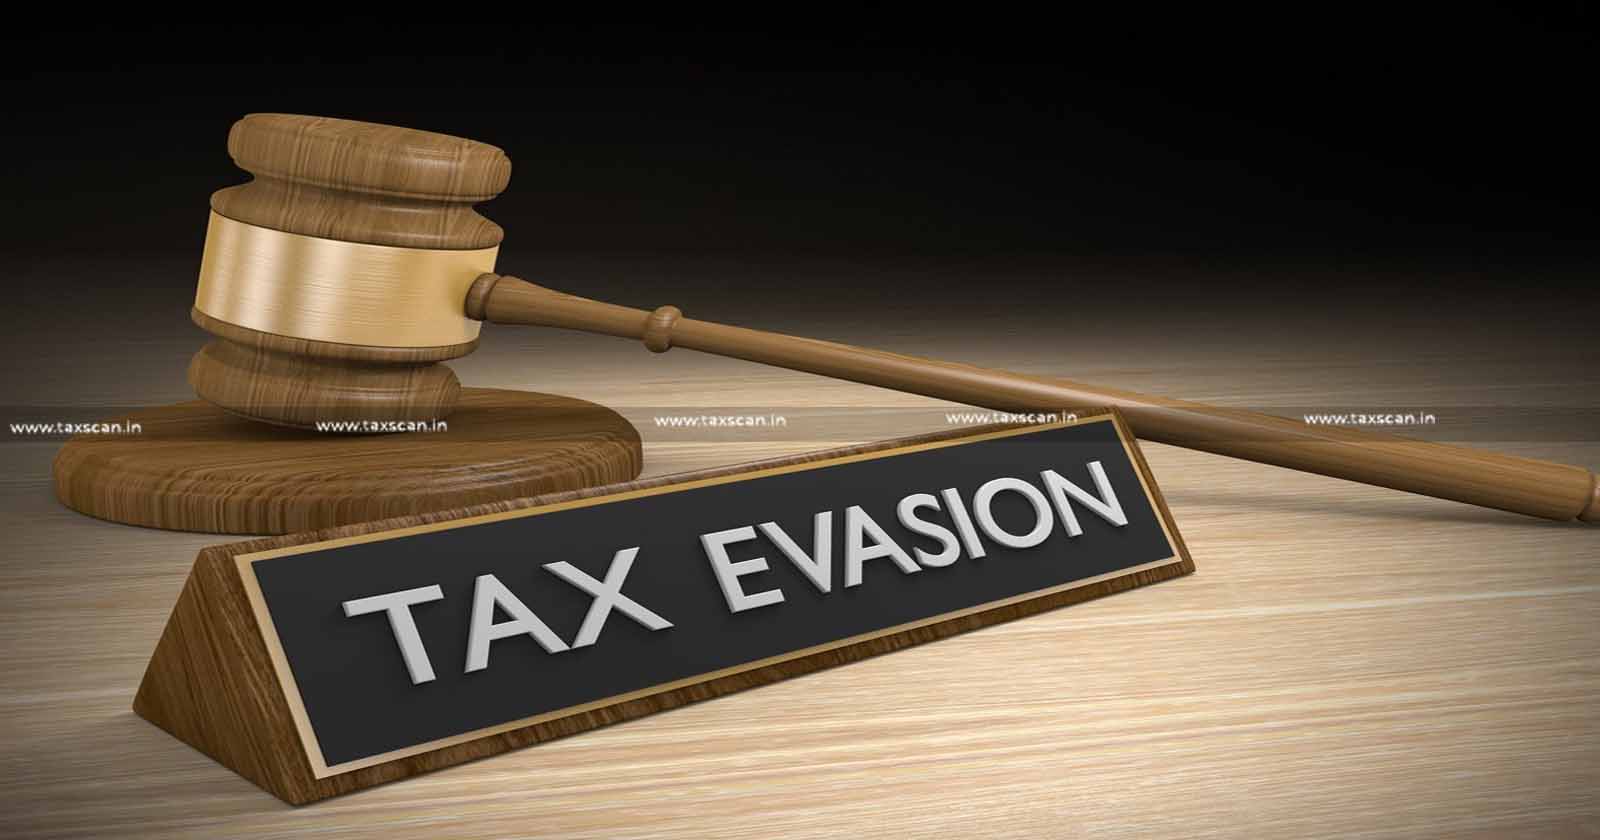 Tax evasion - Colourable Devices - Sham Transaction - defraud Department - ITAT - dismisses - assessee appeal - taxscan